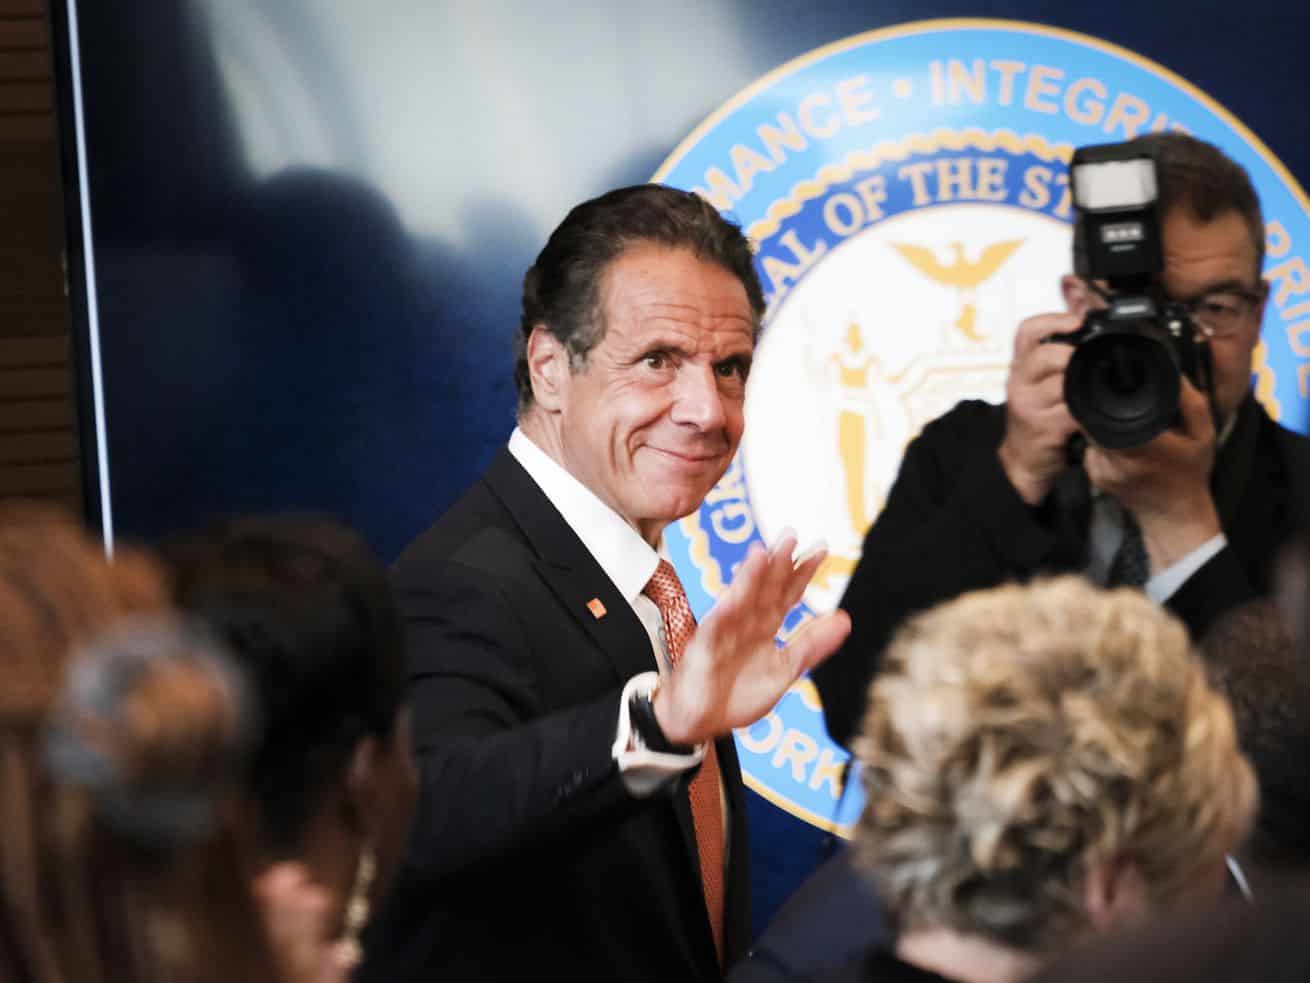 Democrats say Cuomo must resign. He’s refusing. What now?